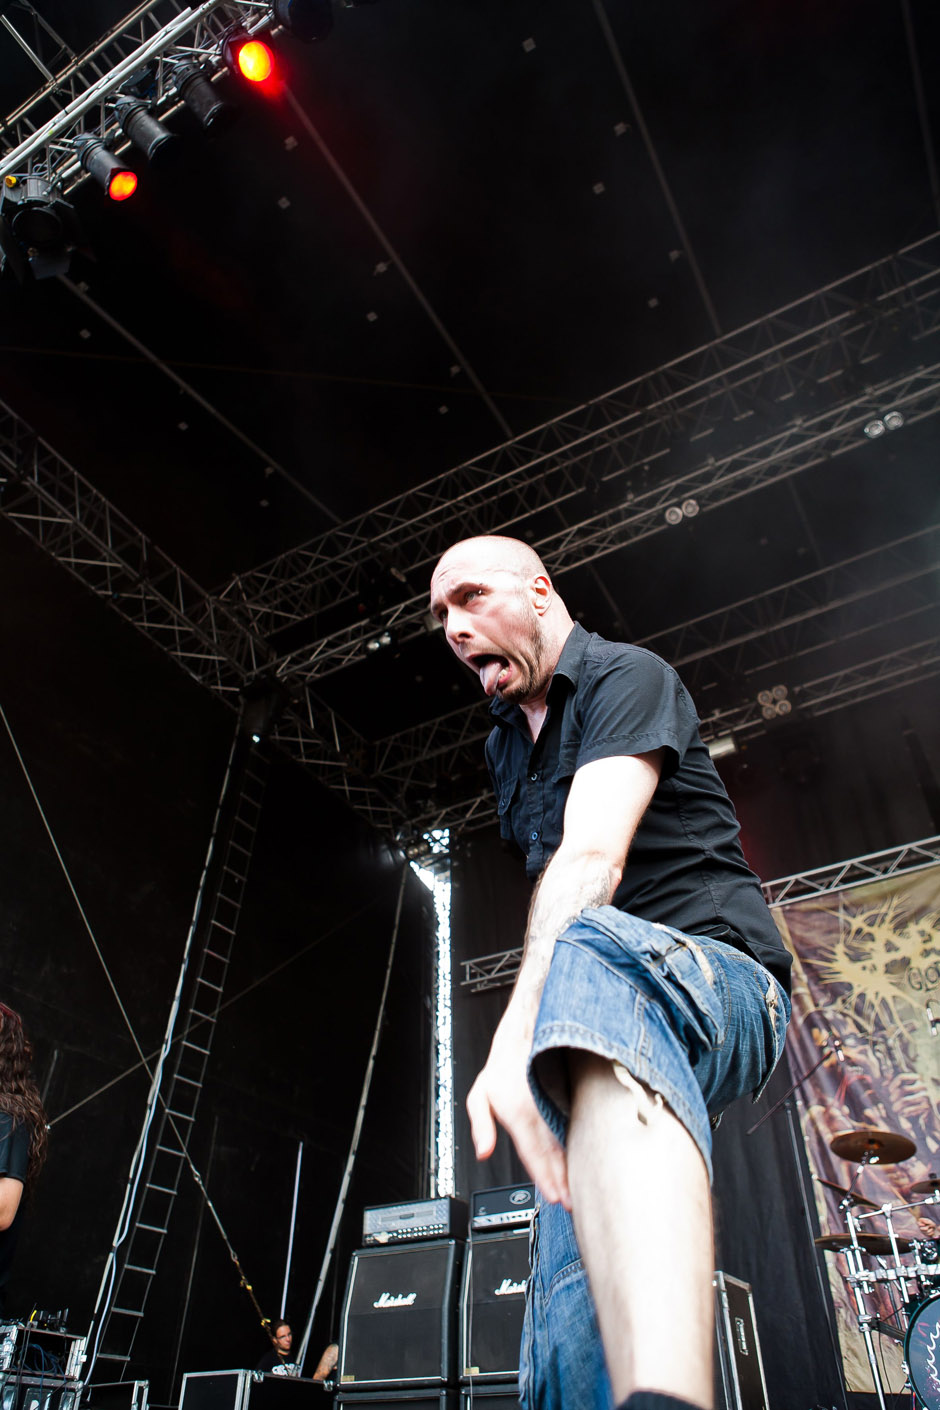 Aborted live, Extremefest 2012 in Hünxe